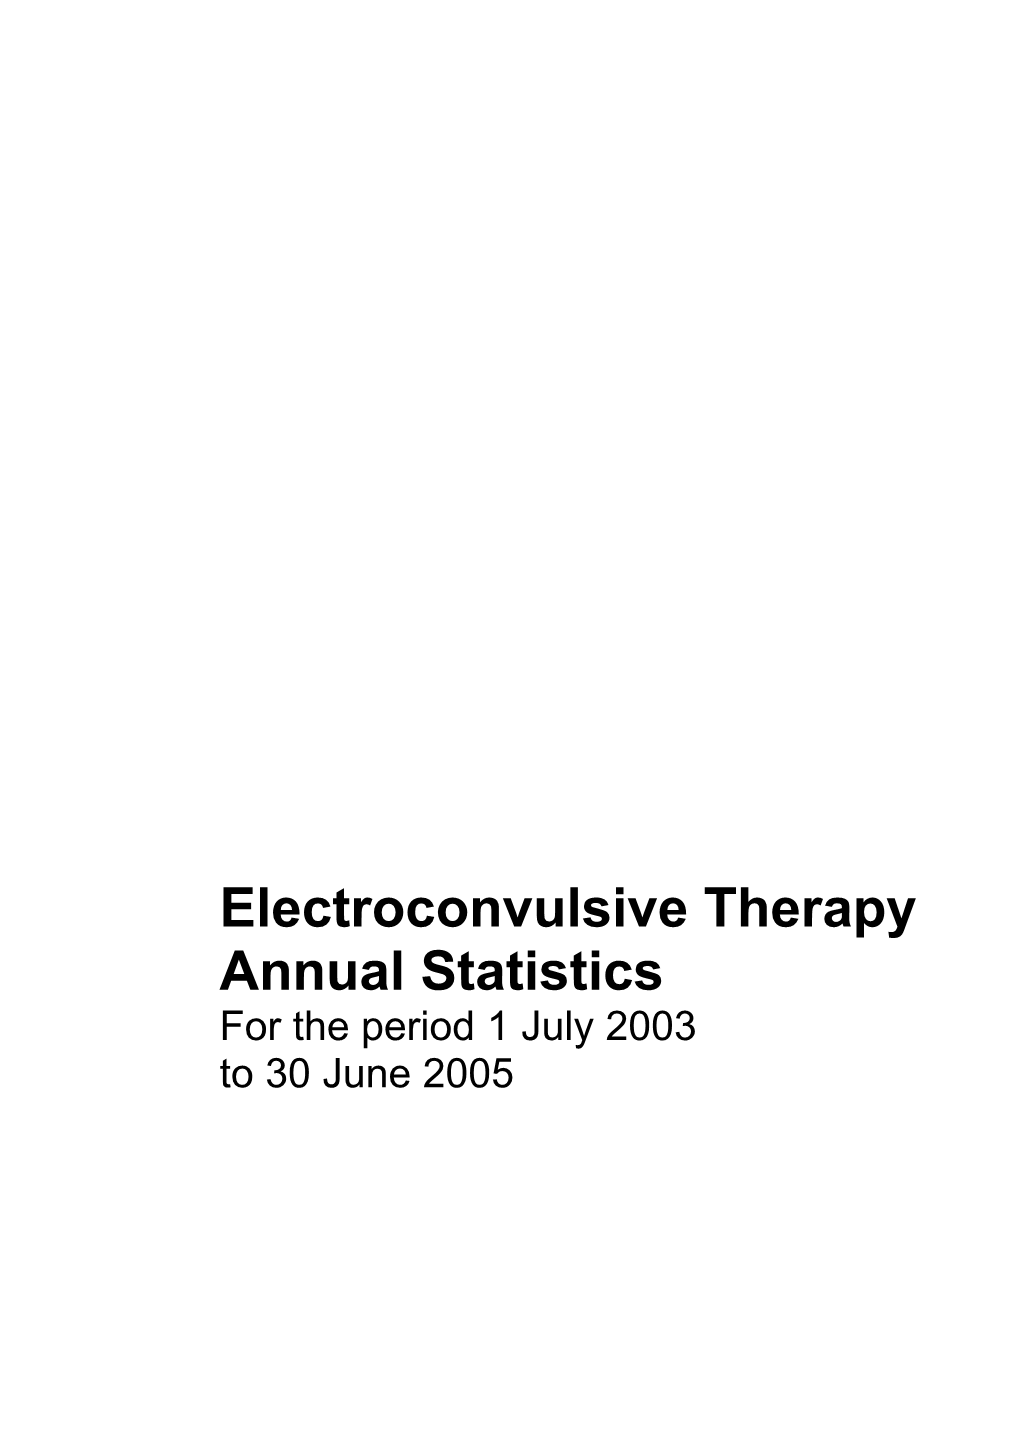 Electroconvulsive Therapy Annual Statistics for the Period 1 July 2003 to 30 June 2005